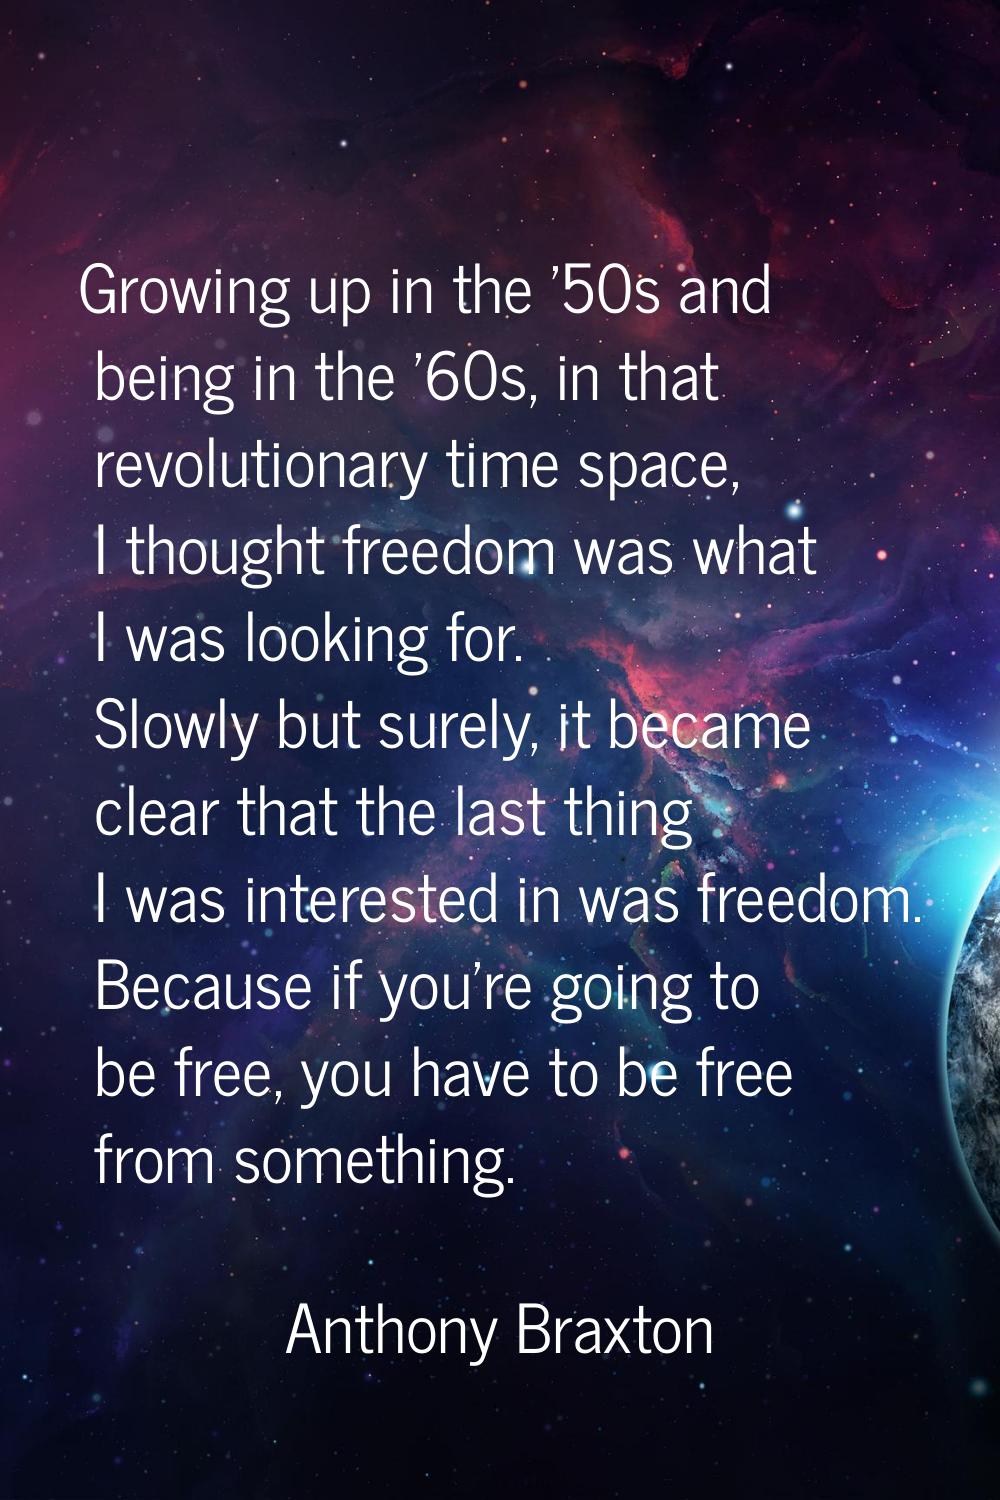 Growing up in the '50s and being in the '60s, in that revolutionary time space, I thought freedom w